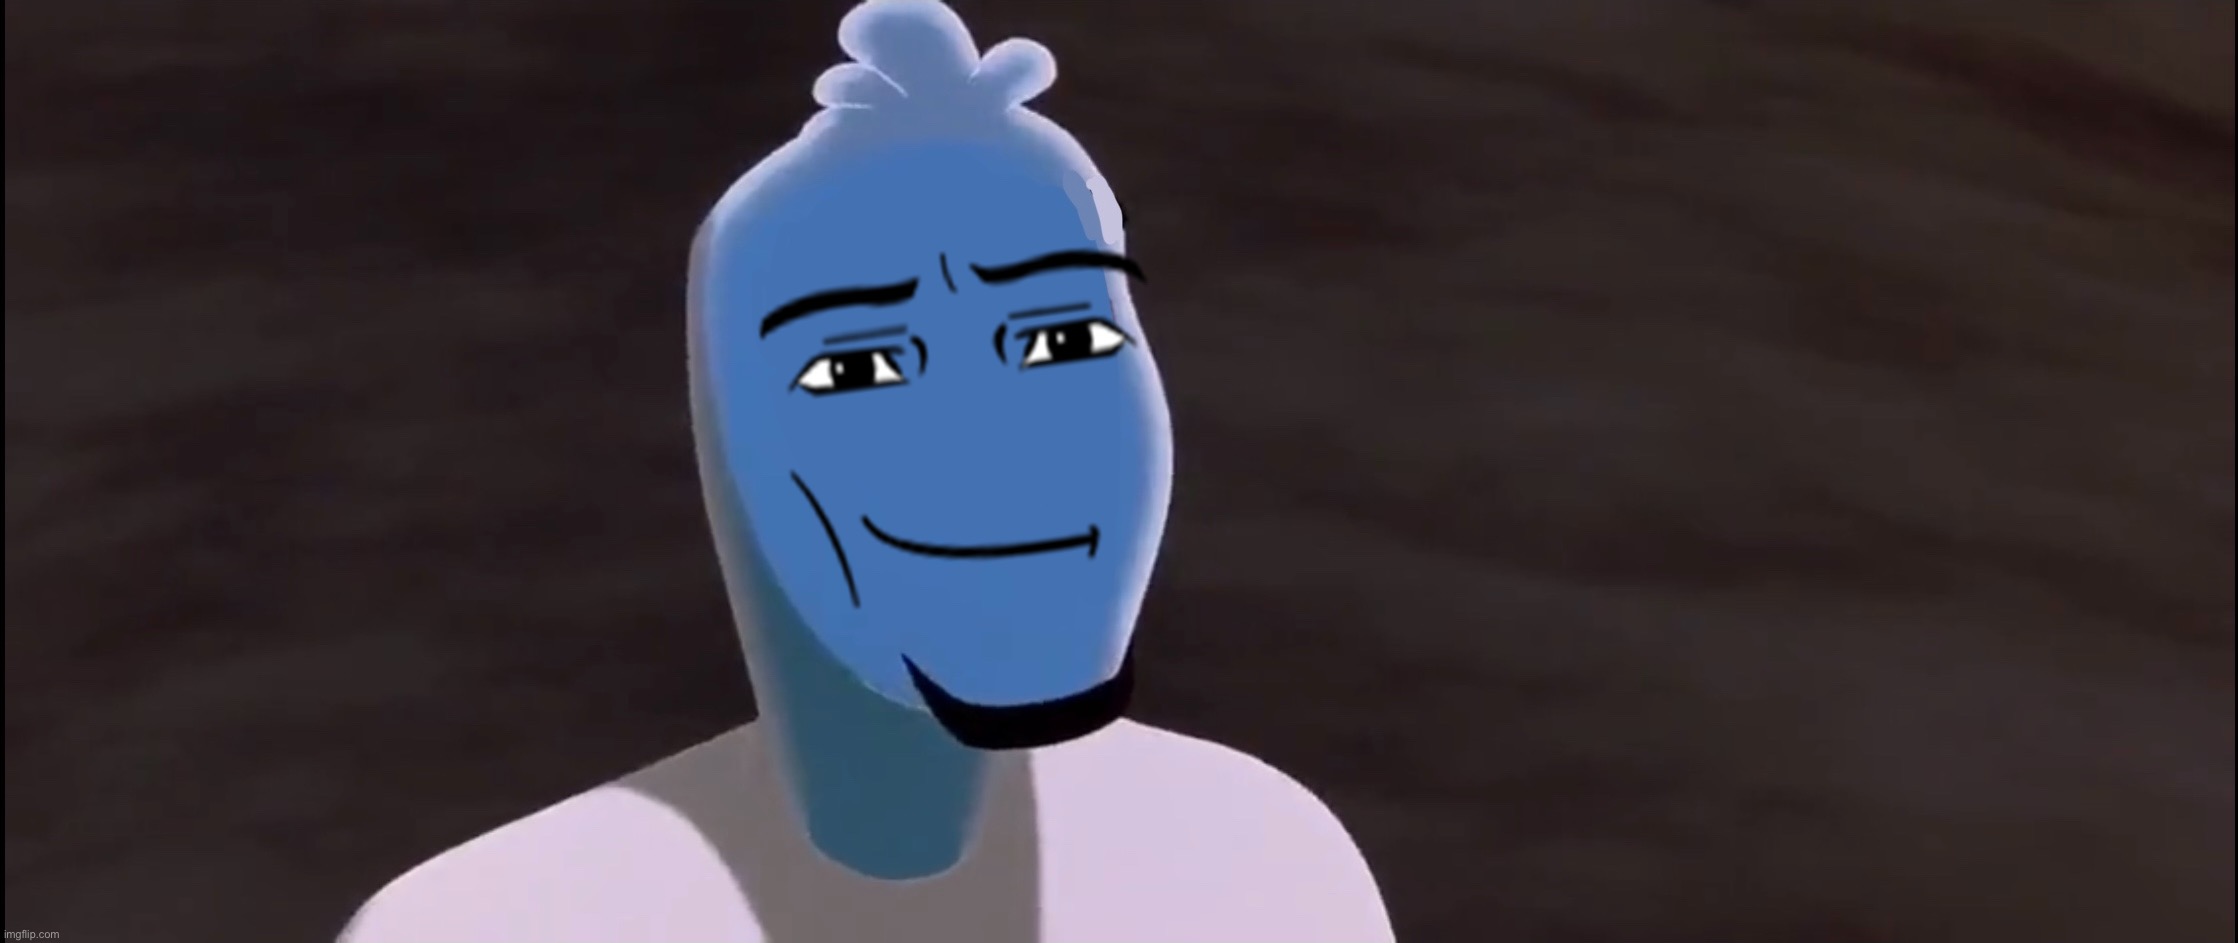 Dank Ozzy | image tagged in osmosis jones,roblox,cursed image,why | made w/ Imgflip meme maker